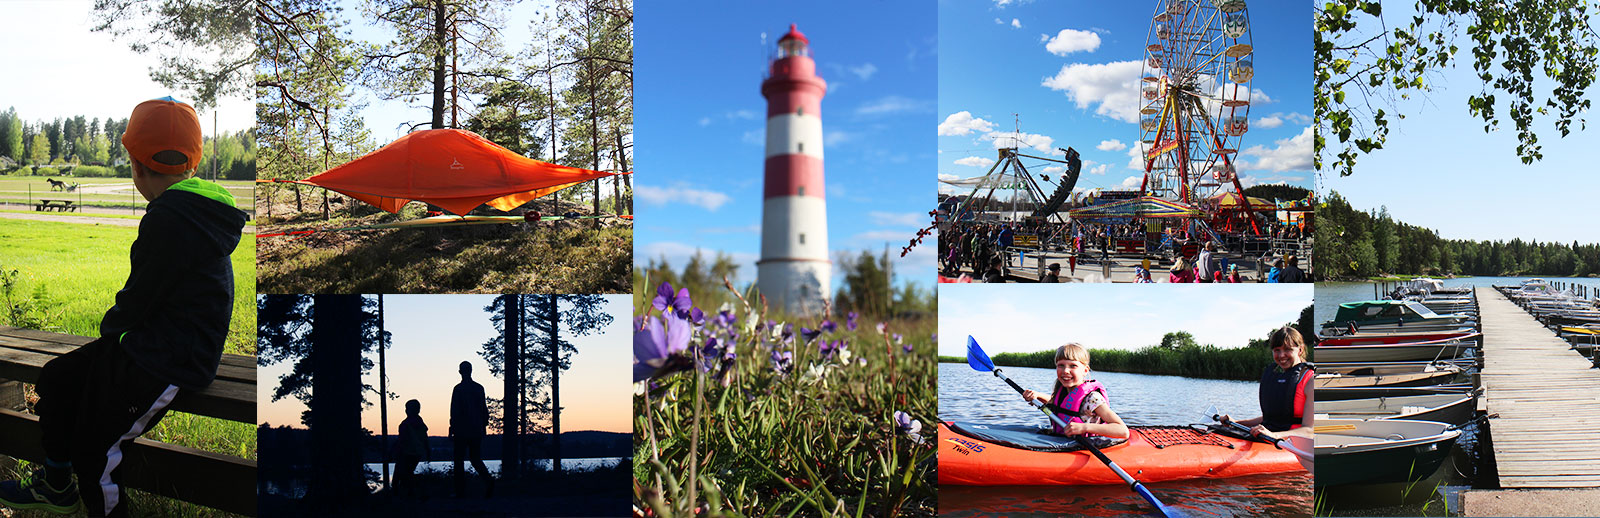 Fun things to do in Finland on Summer holiday